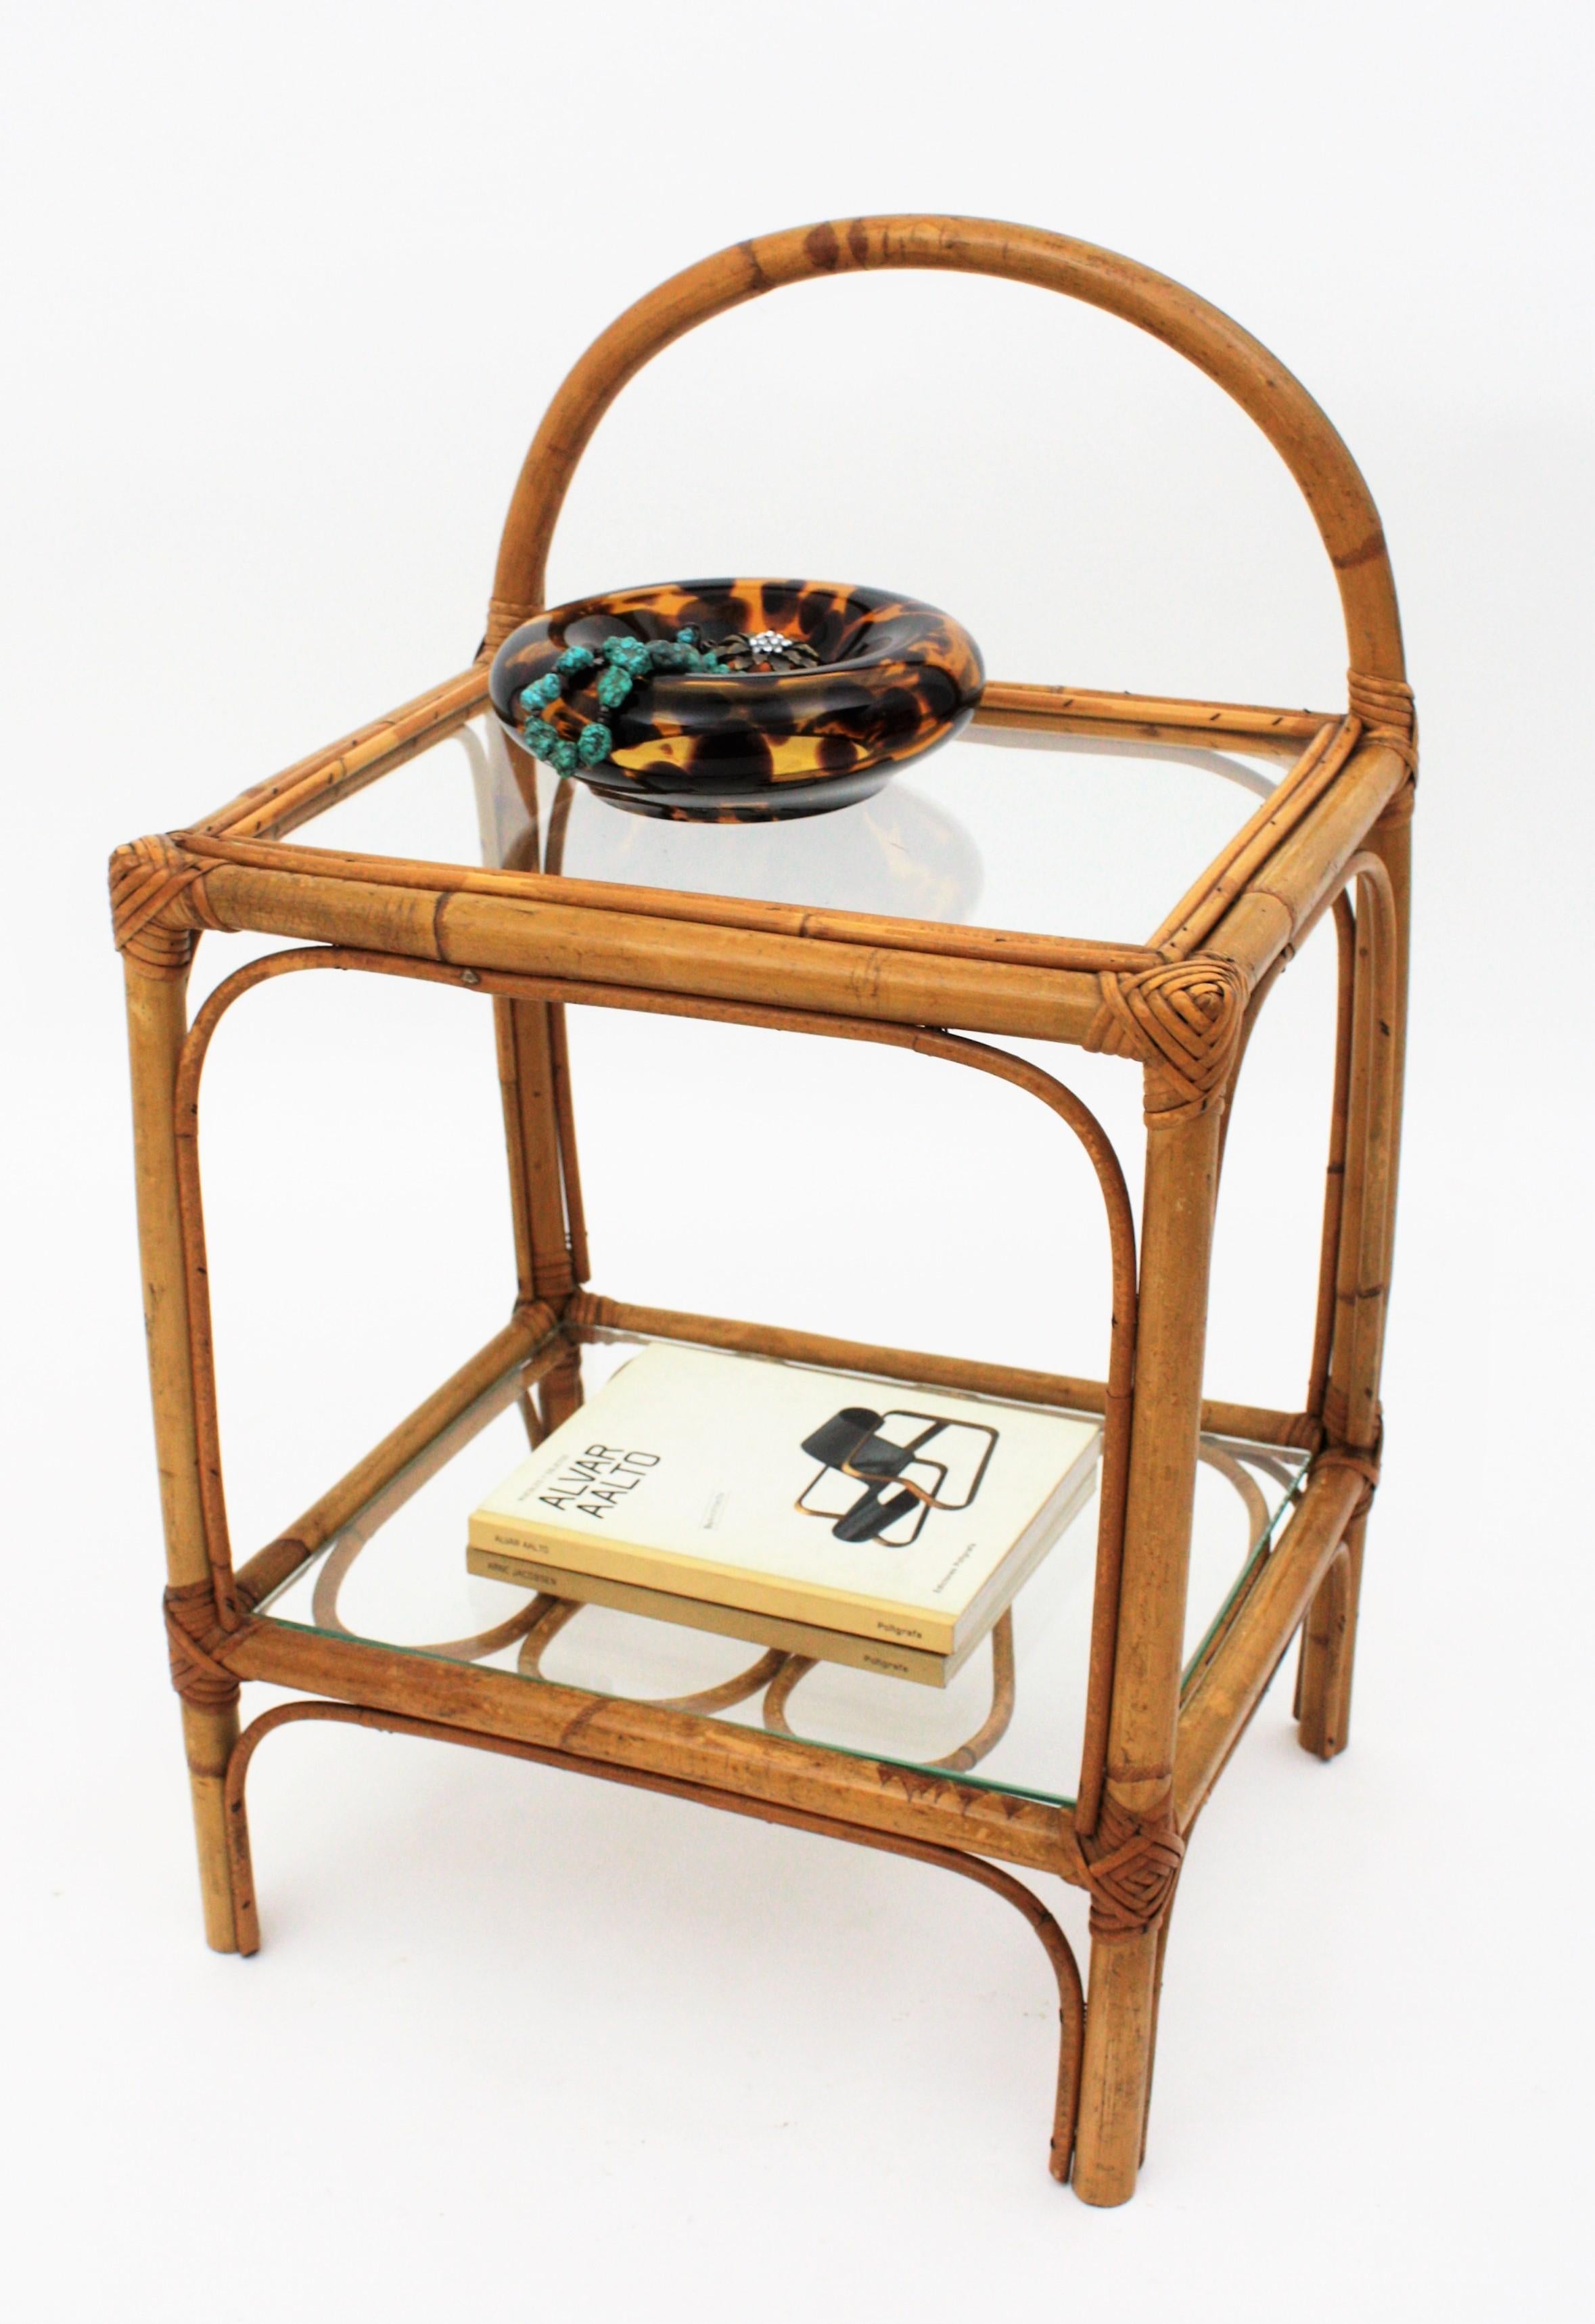 Handcrafted bamboo and rattan Mid-Century Modern table with rattan adorned shelf and glass top, Spain, 1950s.
Use it as bedside table, side table or end table.
Beautiful to be placed indoor in a Mediterranean or Tiki decoration, but also lovely to